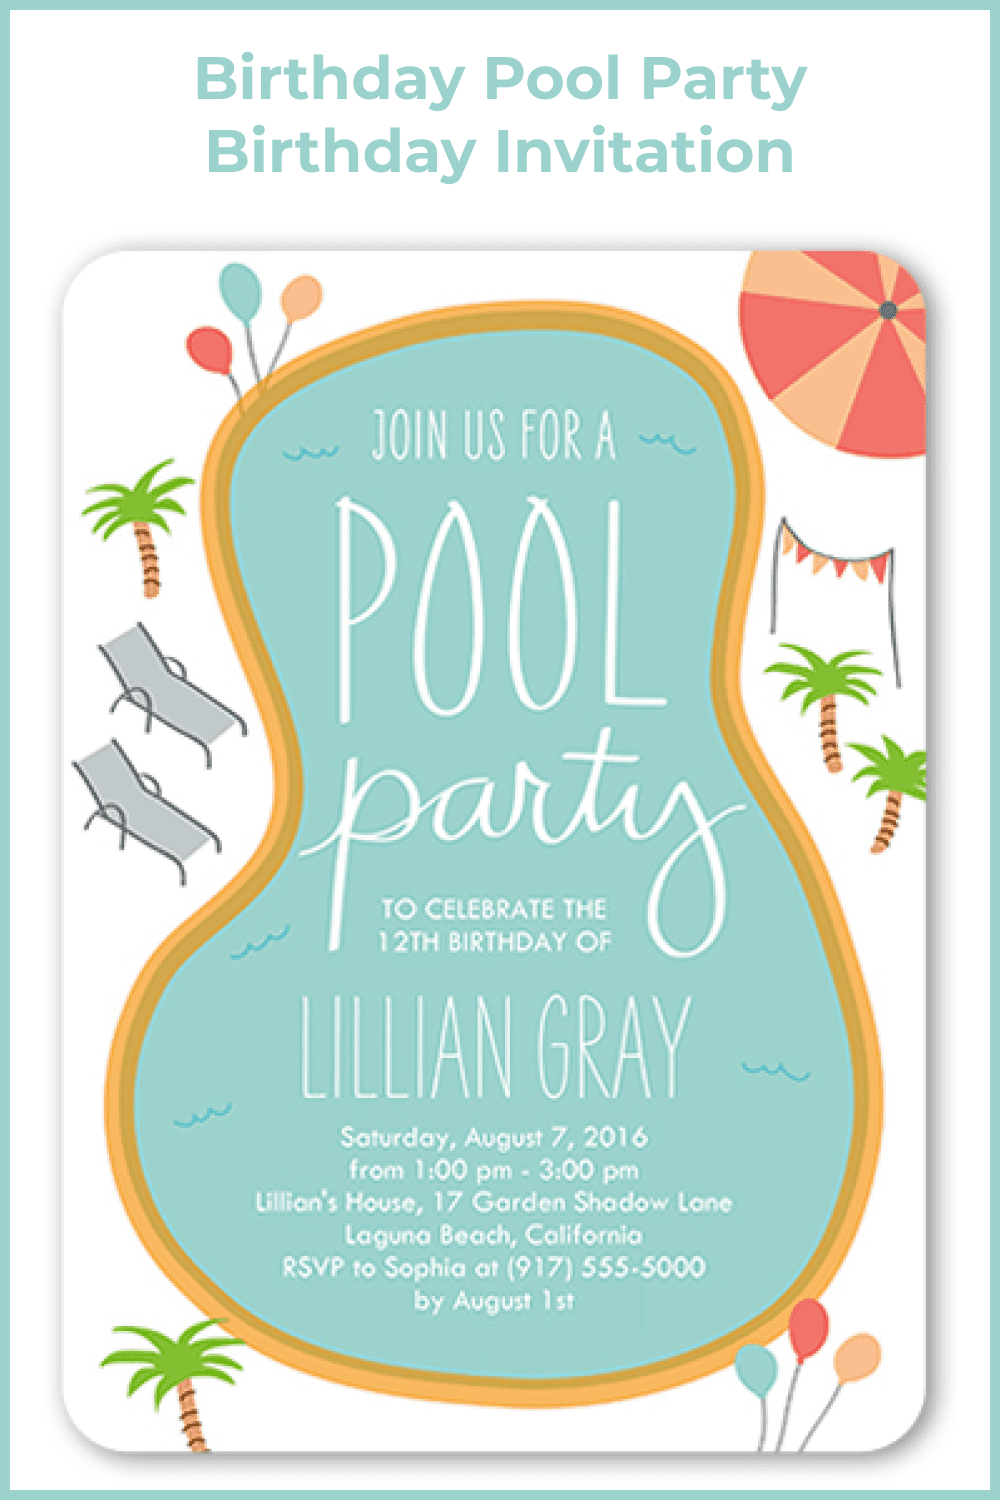 Stylish invitation in the shape of a pool.